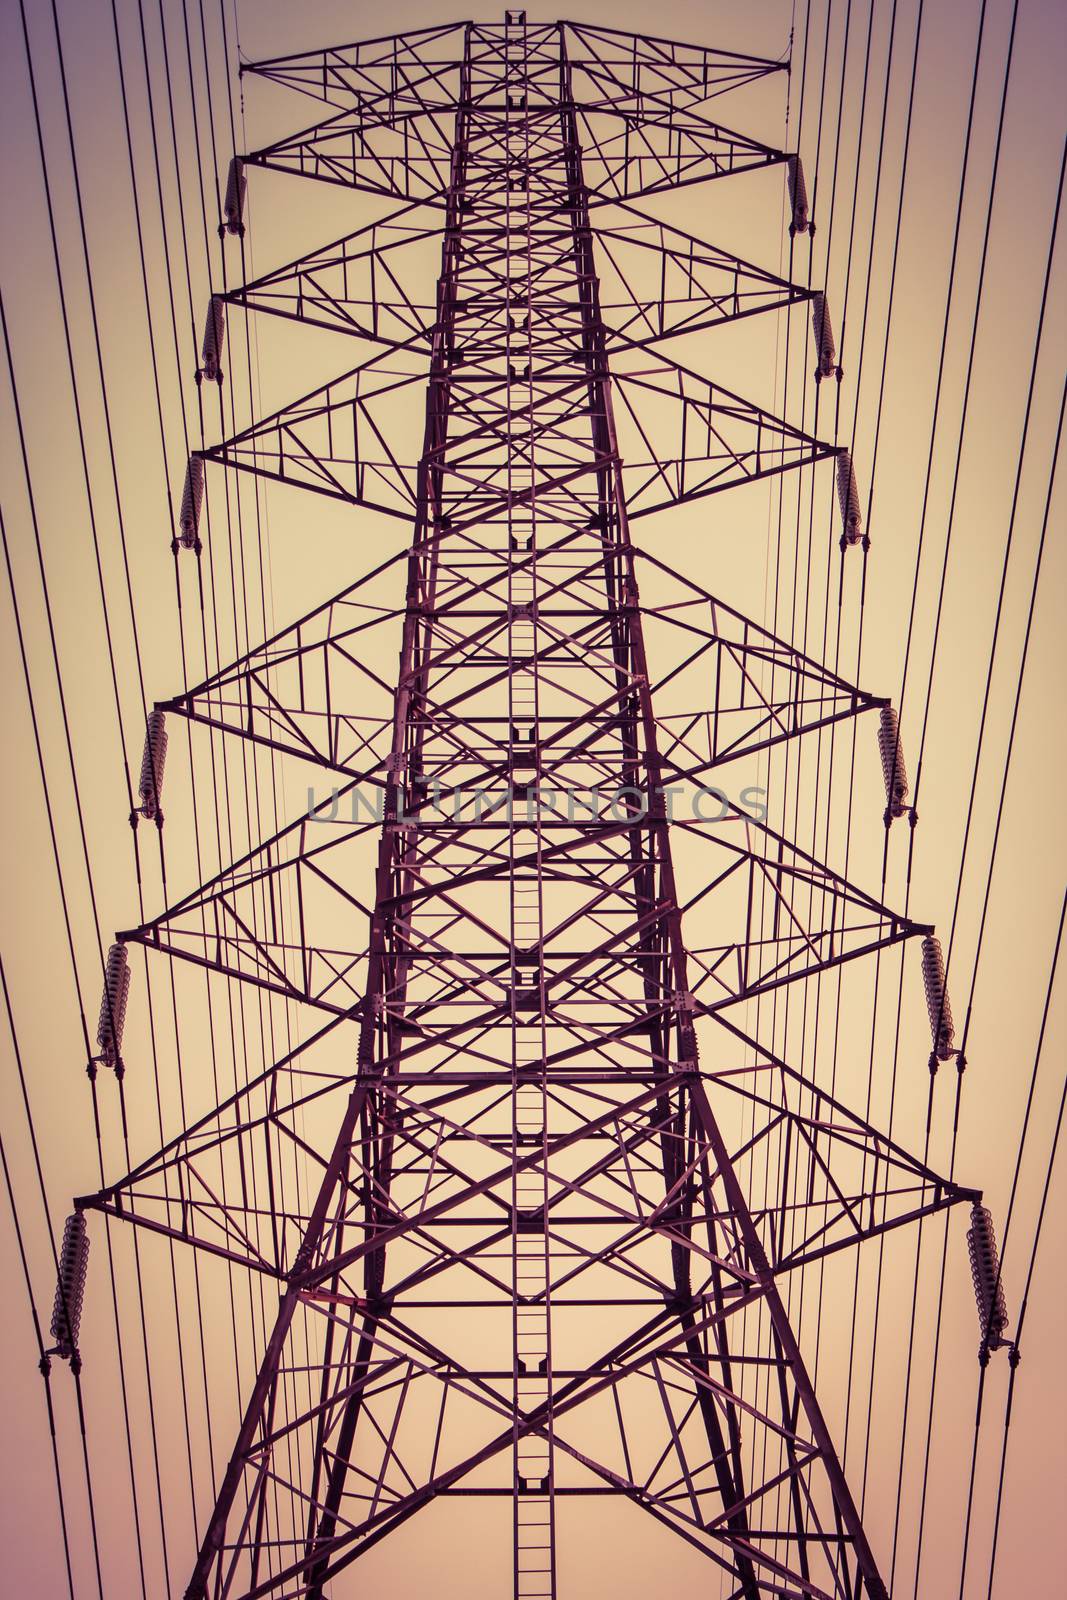 electricity power line by letoakin